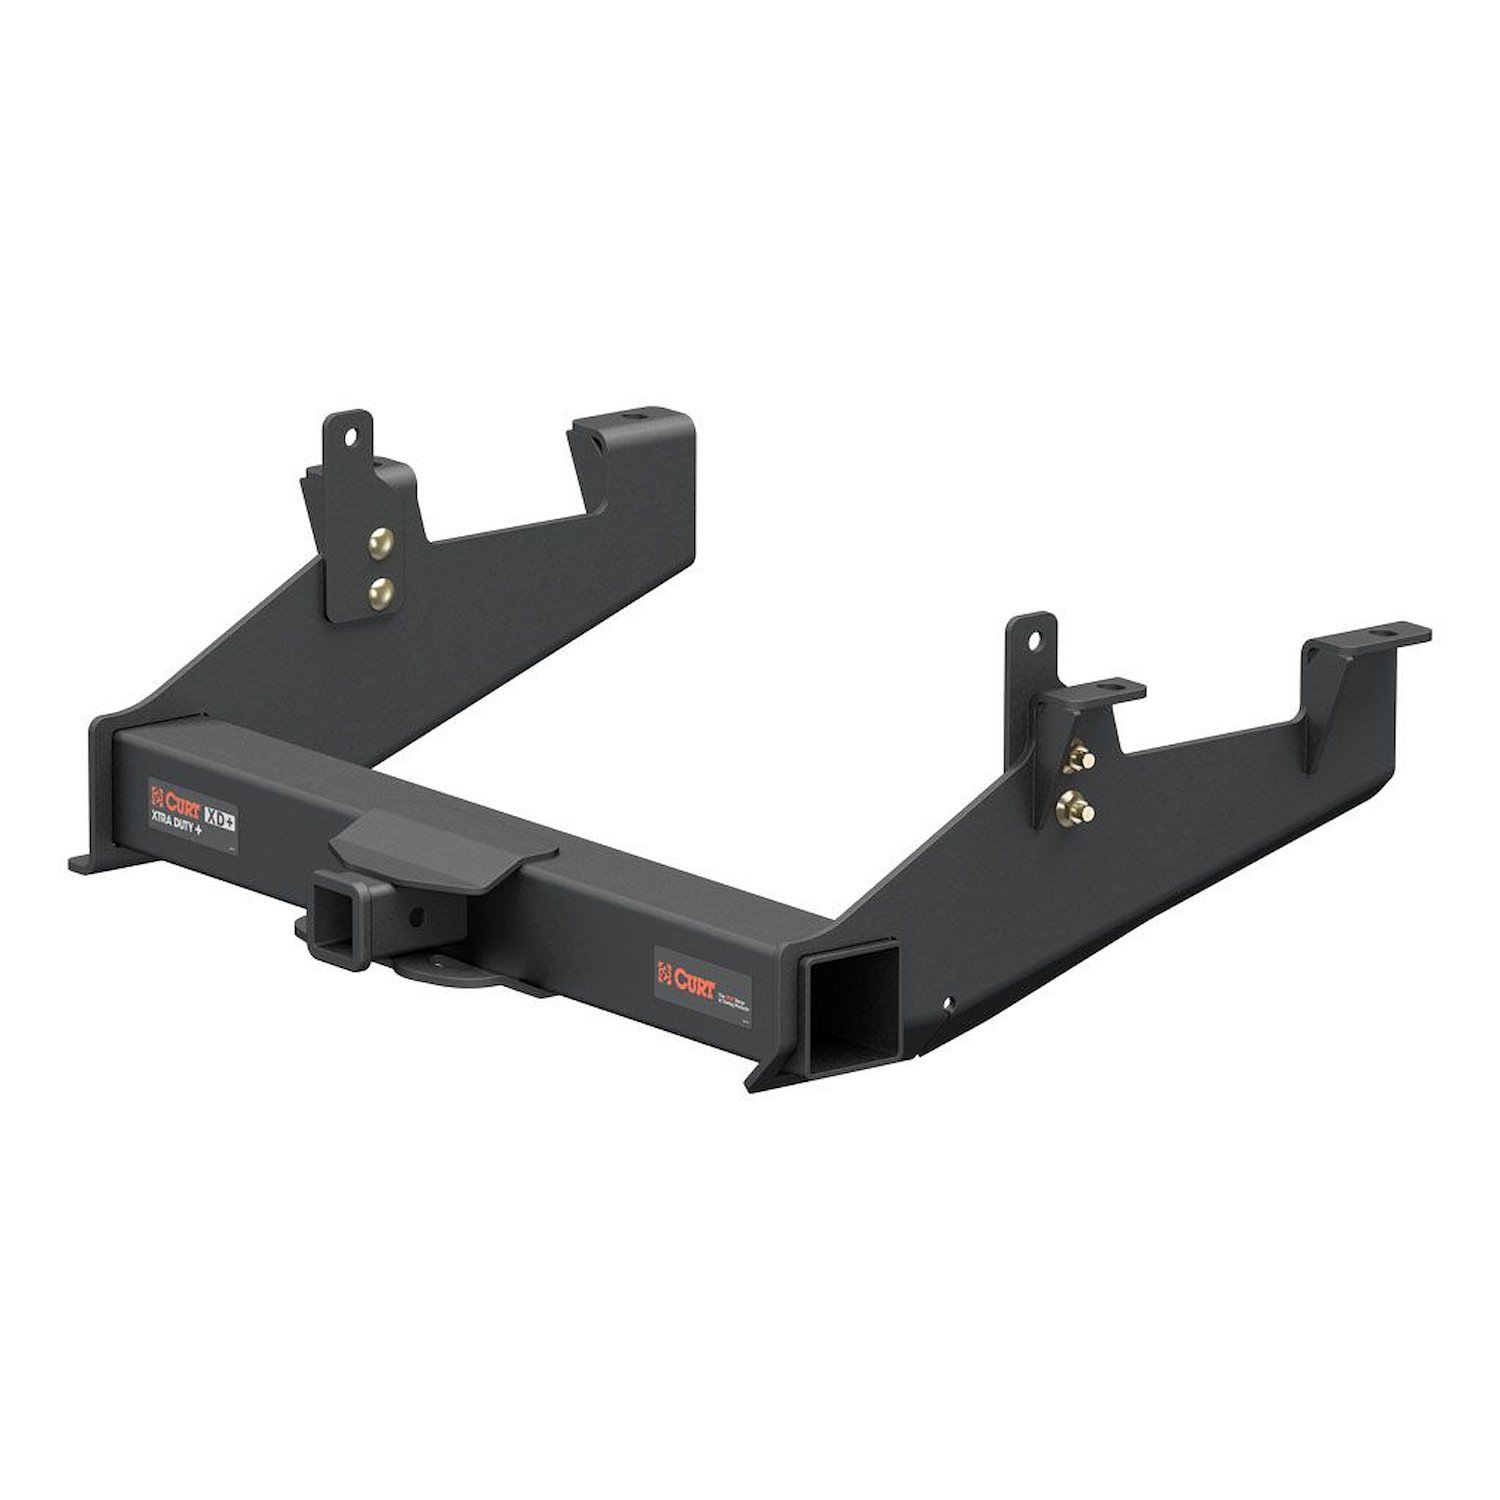 Class 5 Xtra Duty Receiver Hitch Fits Select